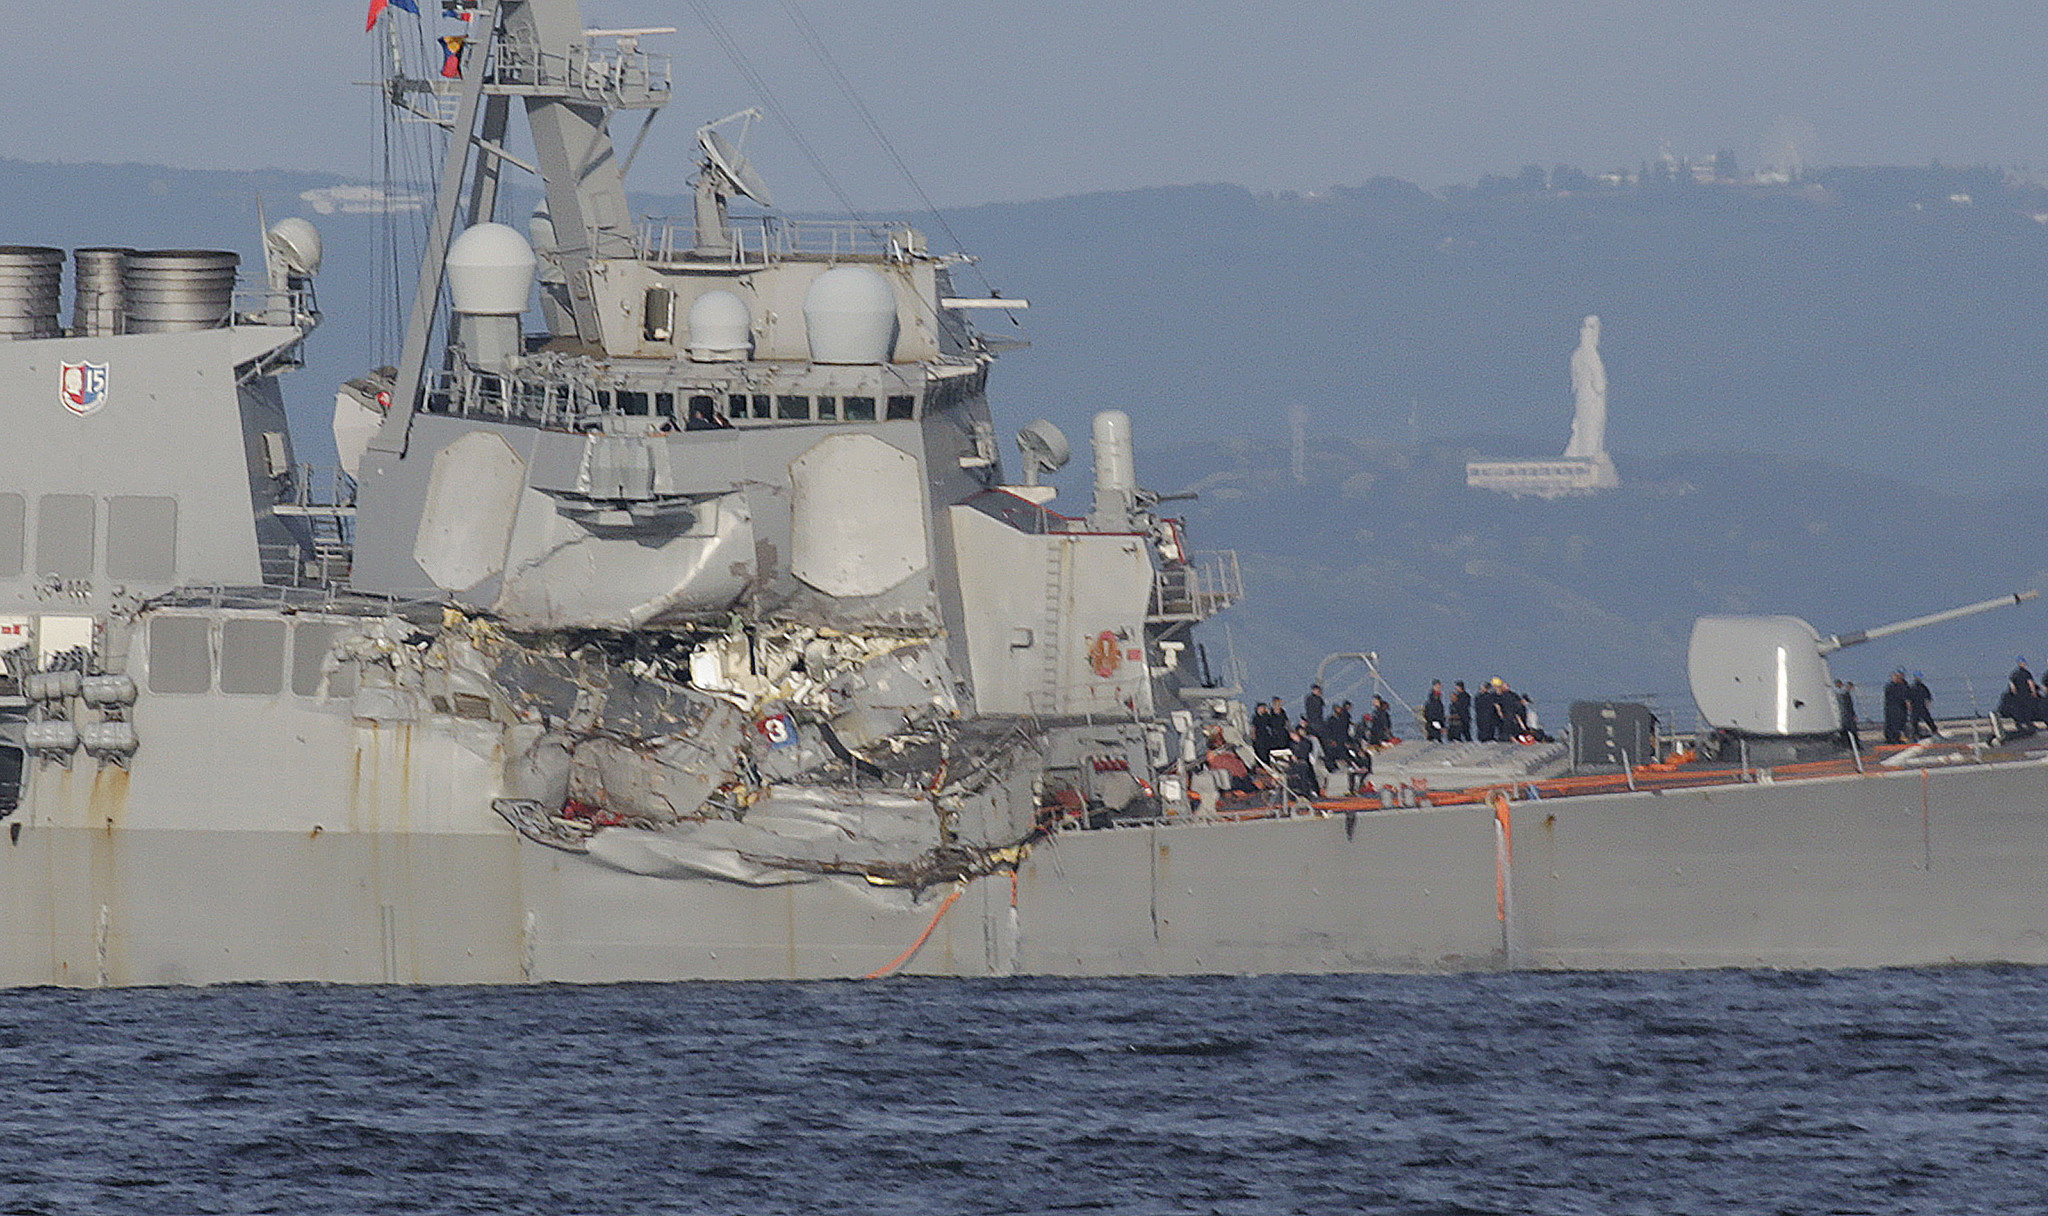 U.S. Navy: Several bodies of missing sailors found on ship after ...